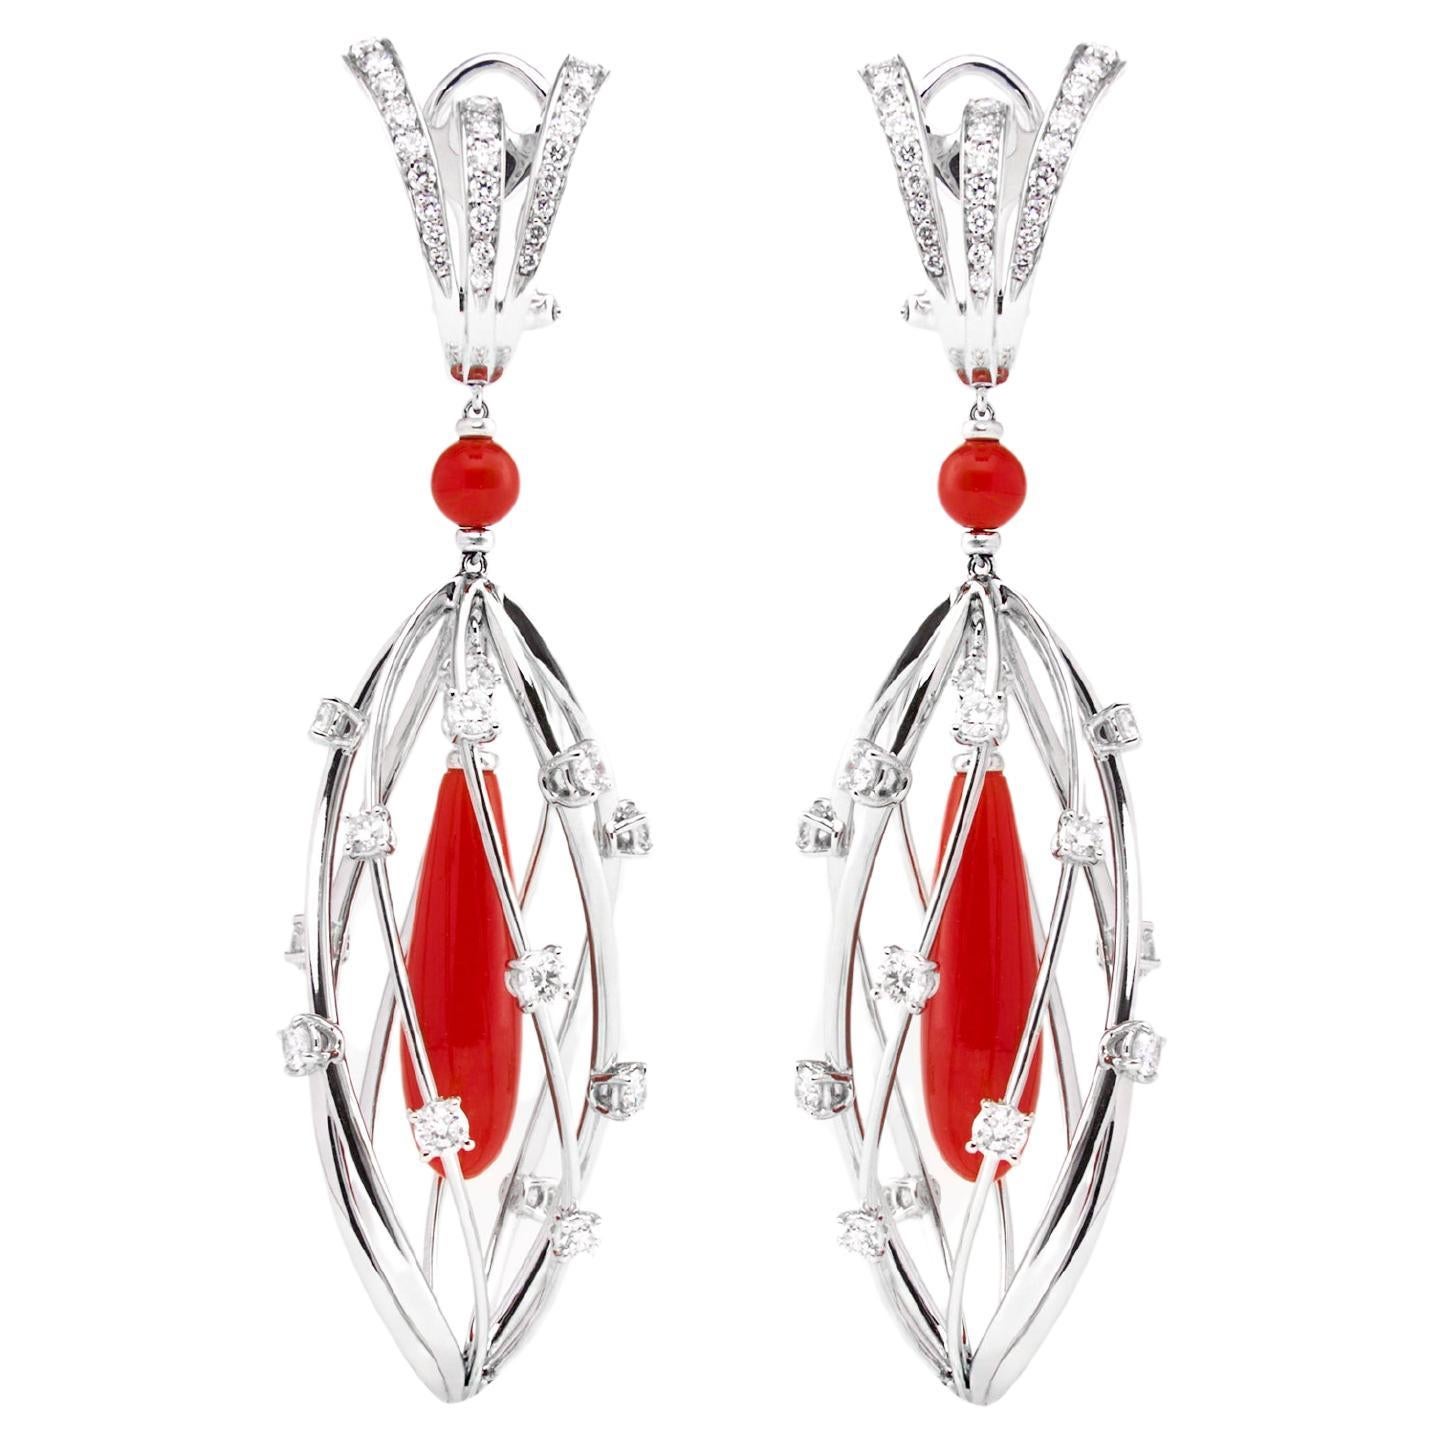 SCAVIA 2.94 Ct Diamonds Pavè RED CAGE Earrings 18K White Gold For Sale